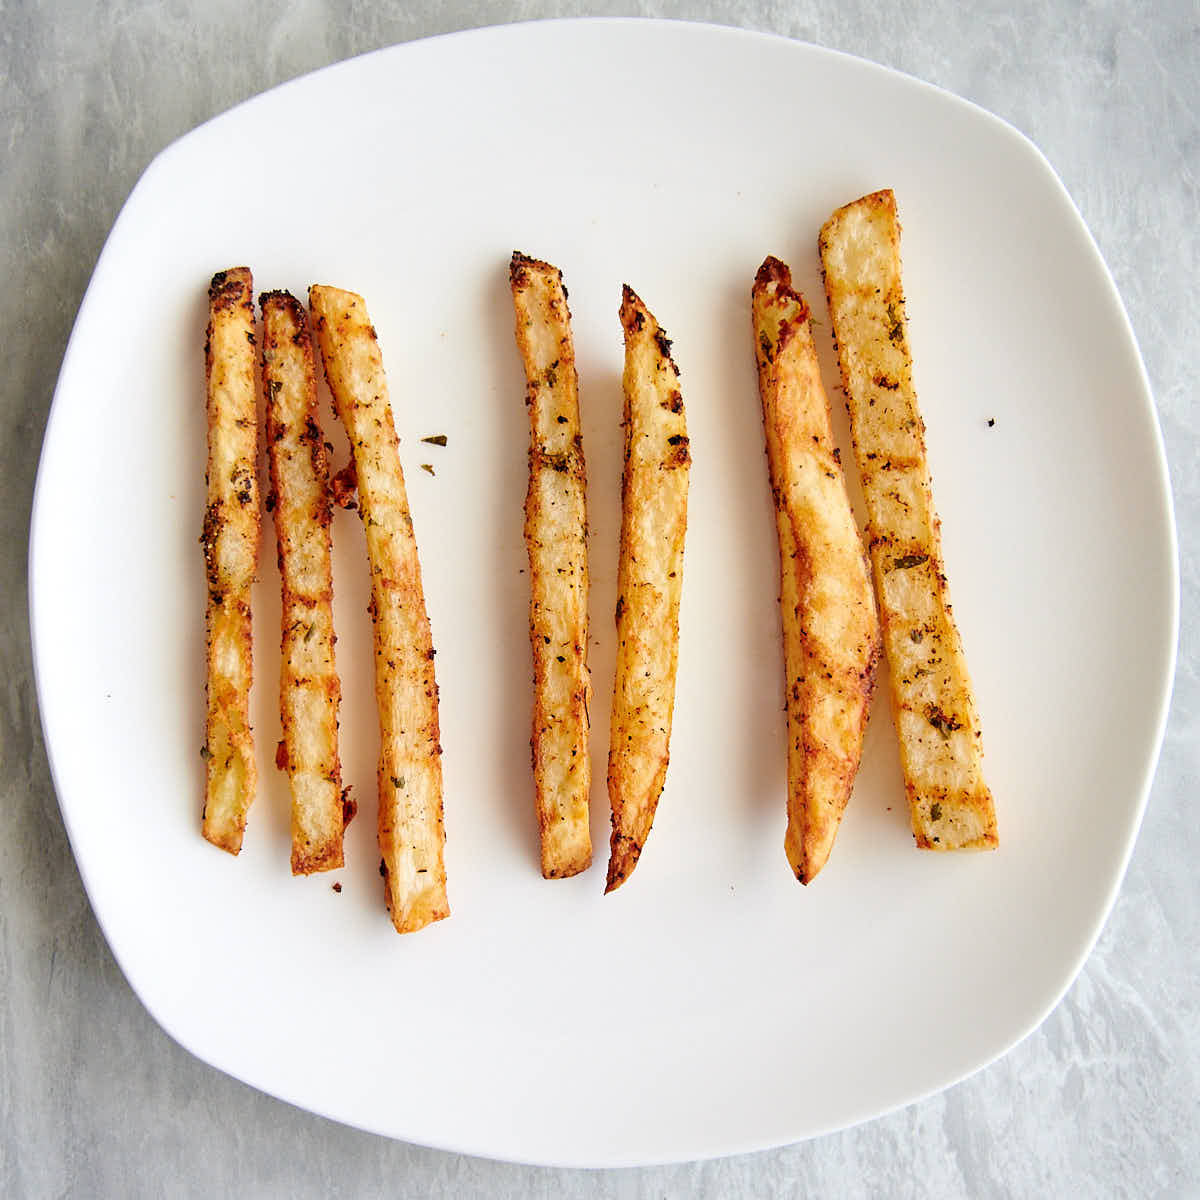 Three sets of air fried French fries of varying thickness on a white plate.